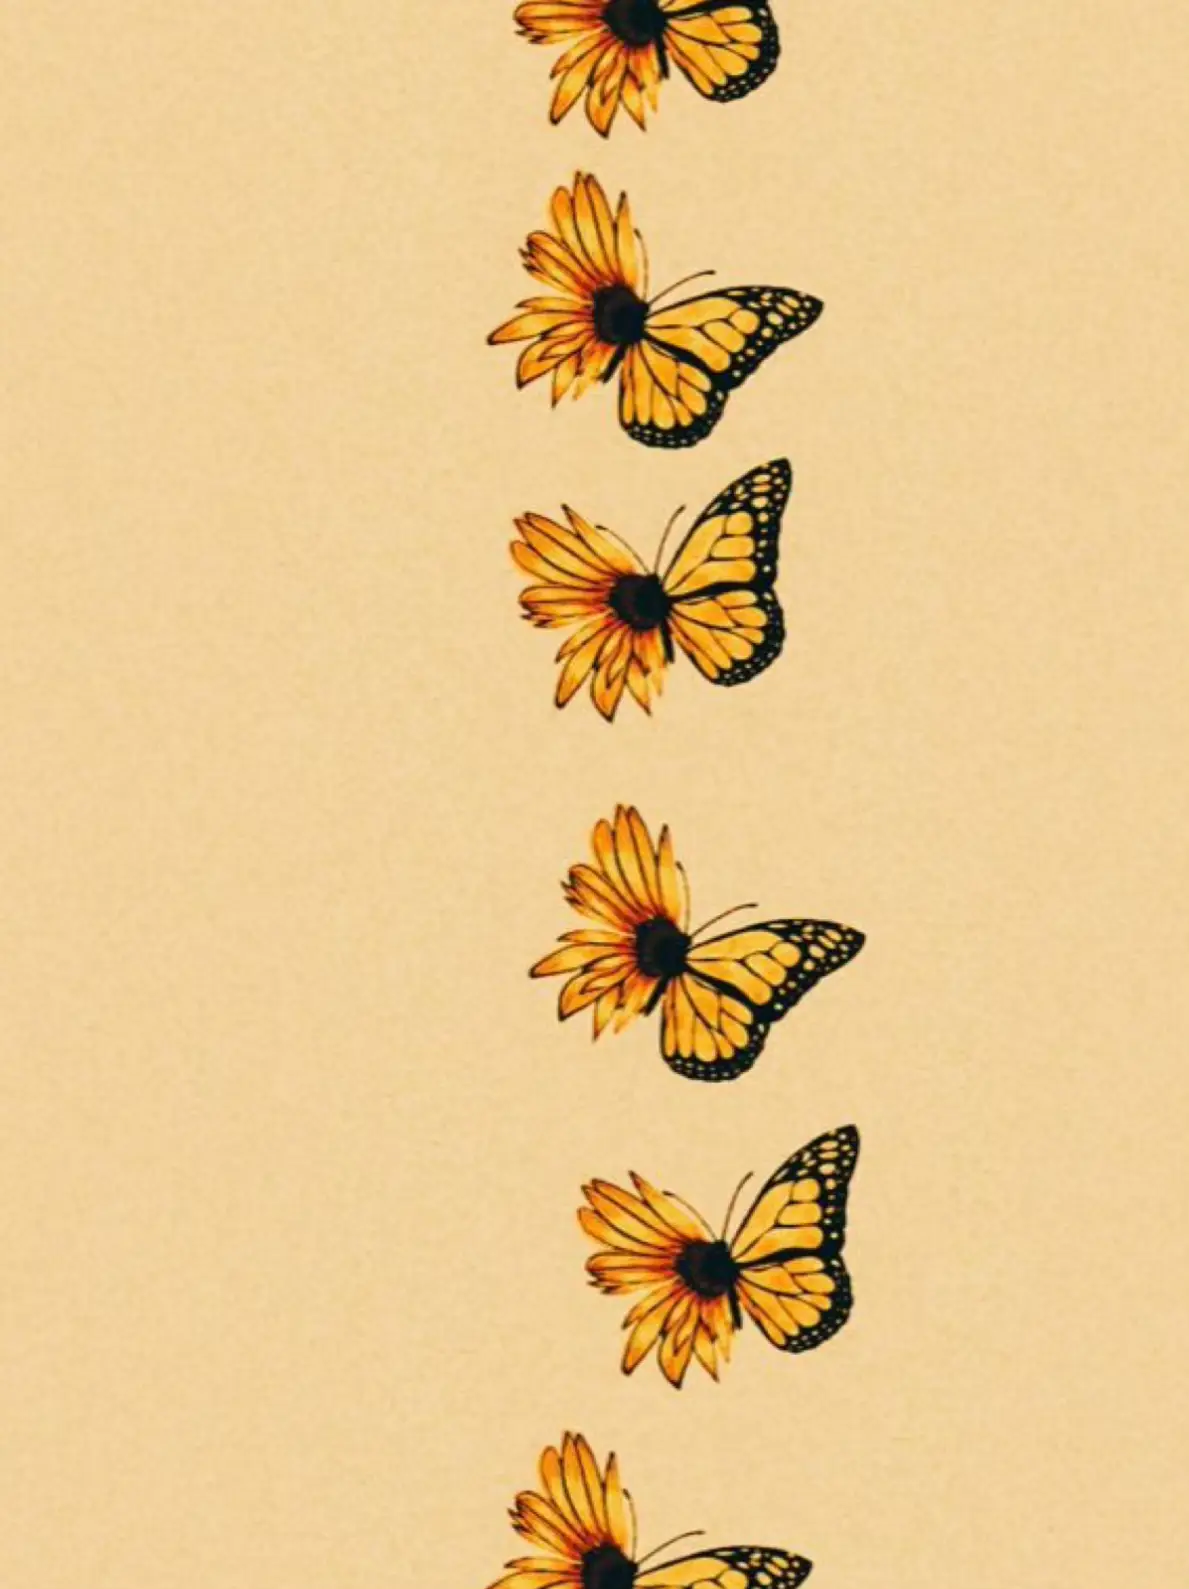  A row of butterflies flying in the air.